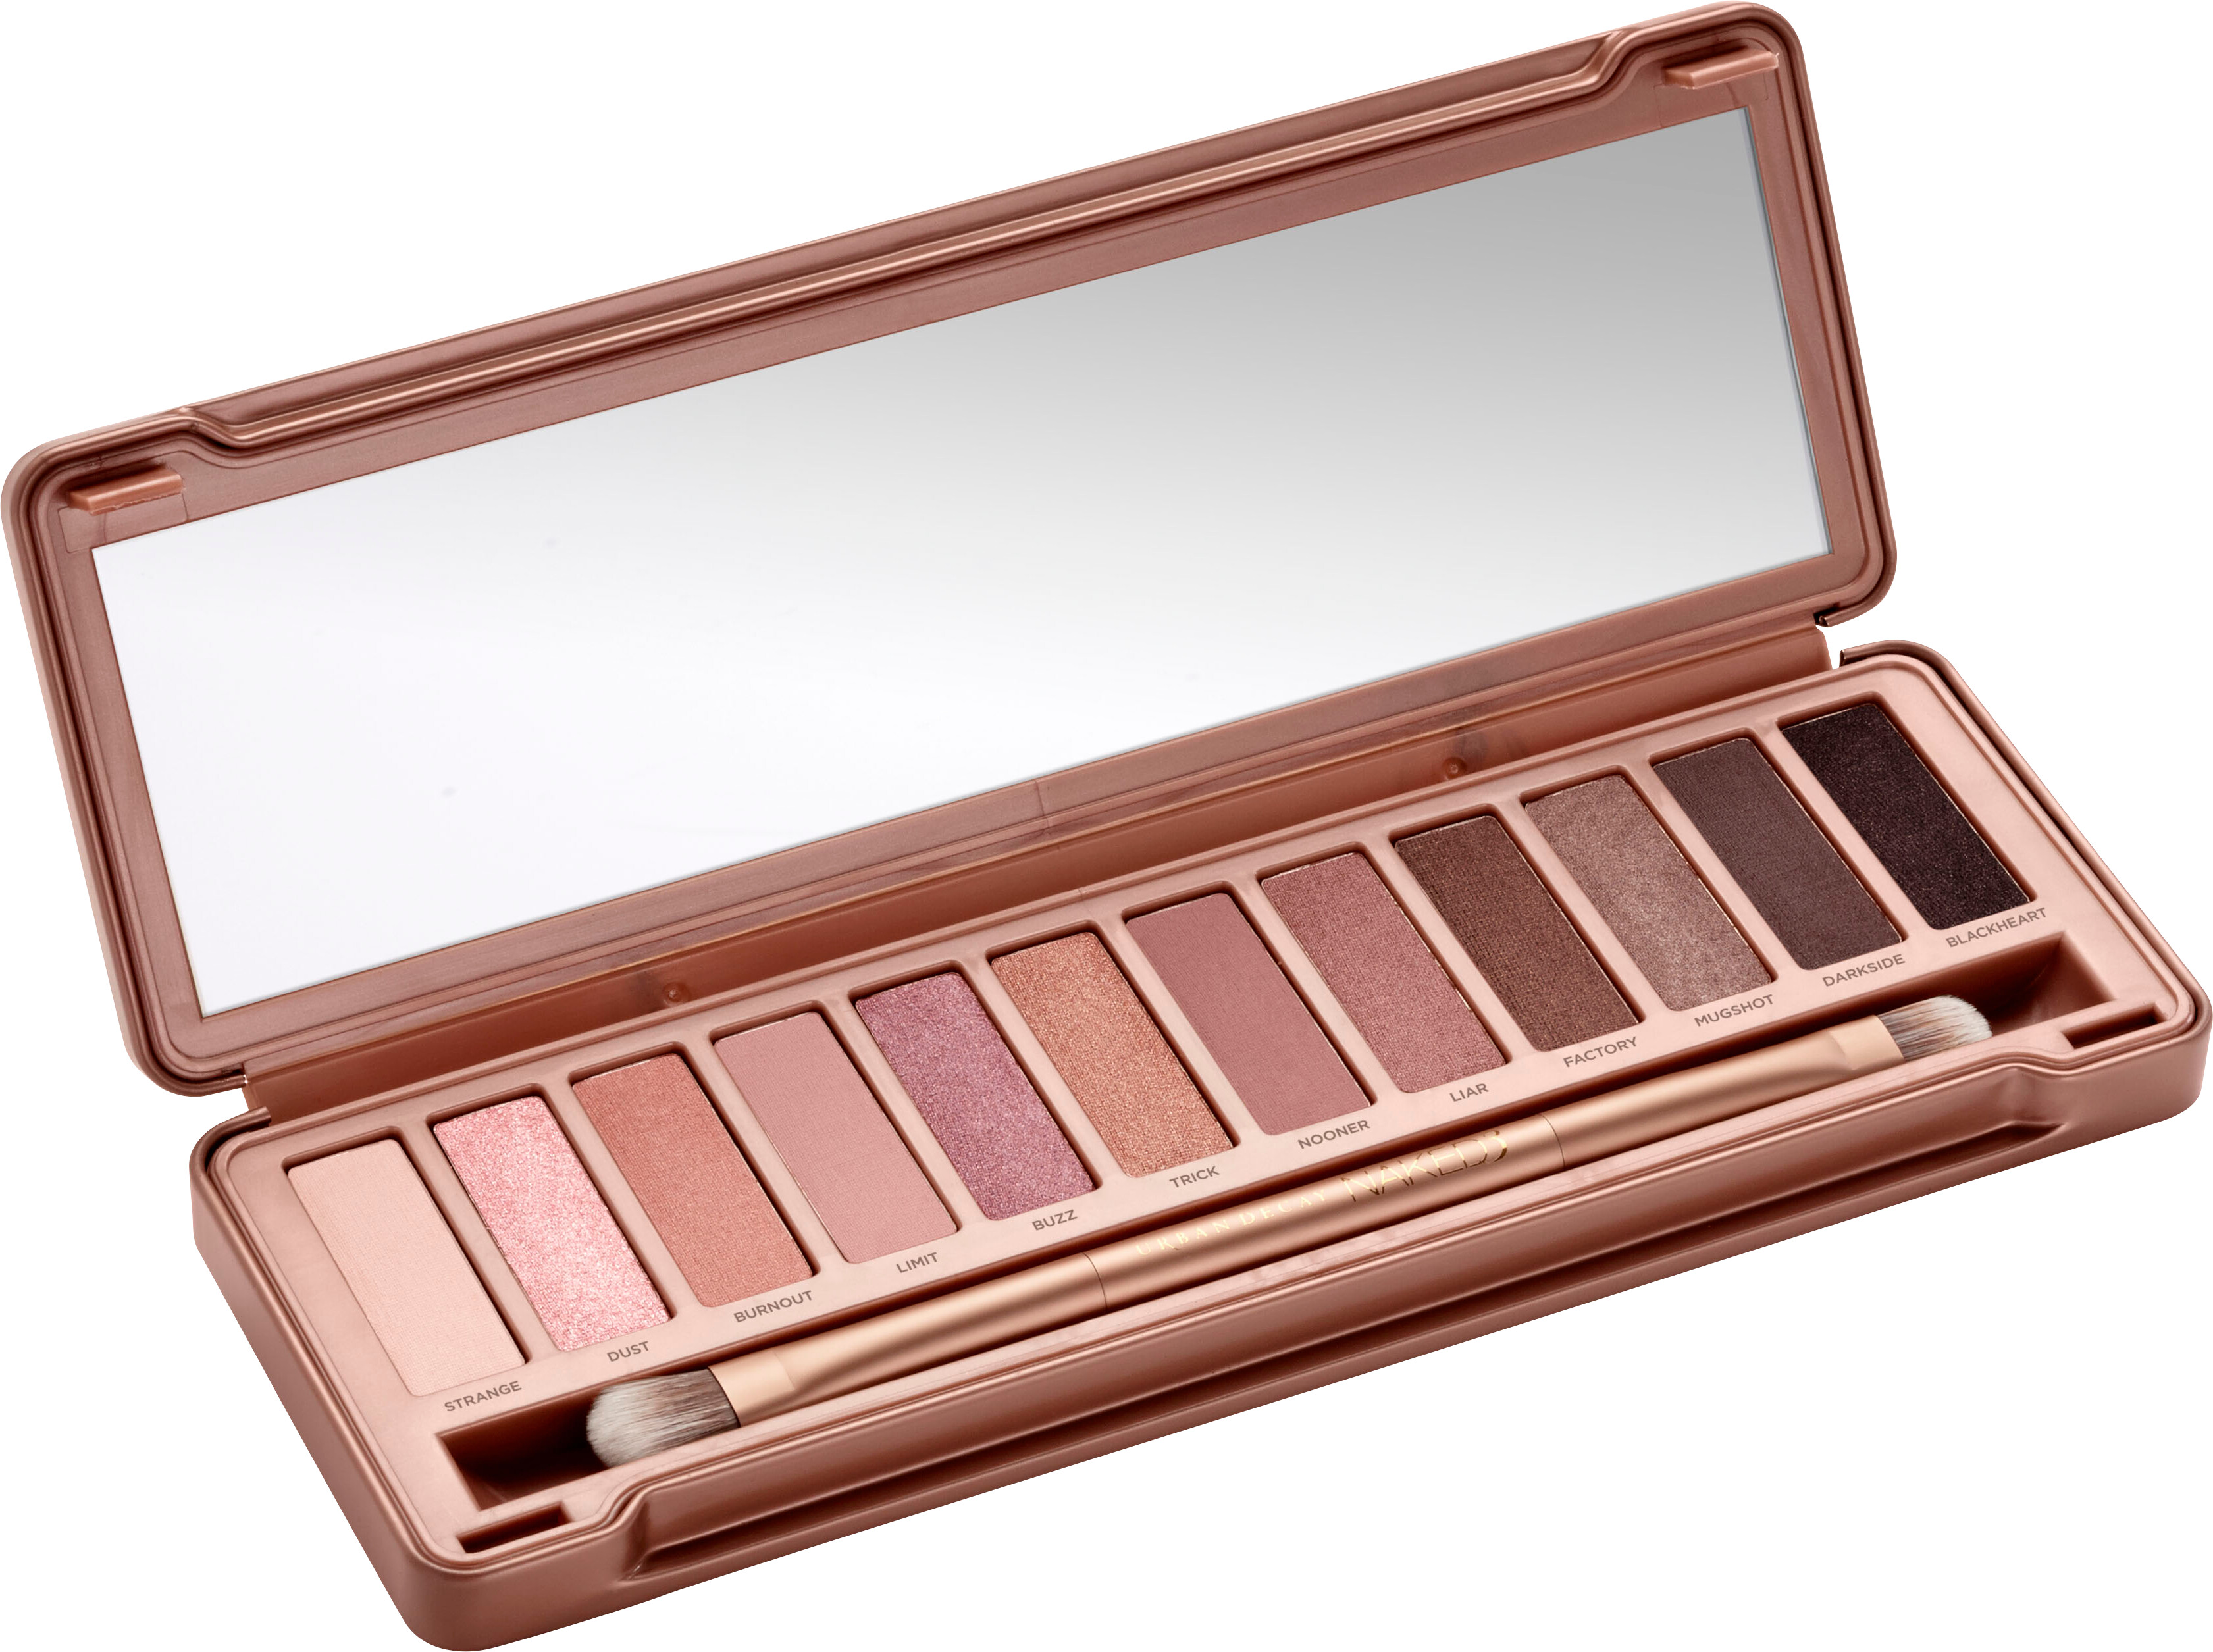 Urban Decay Naked 2 Eyeshadow Palette Review & Swatches